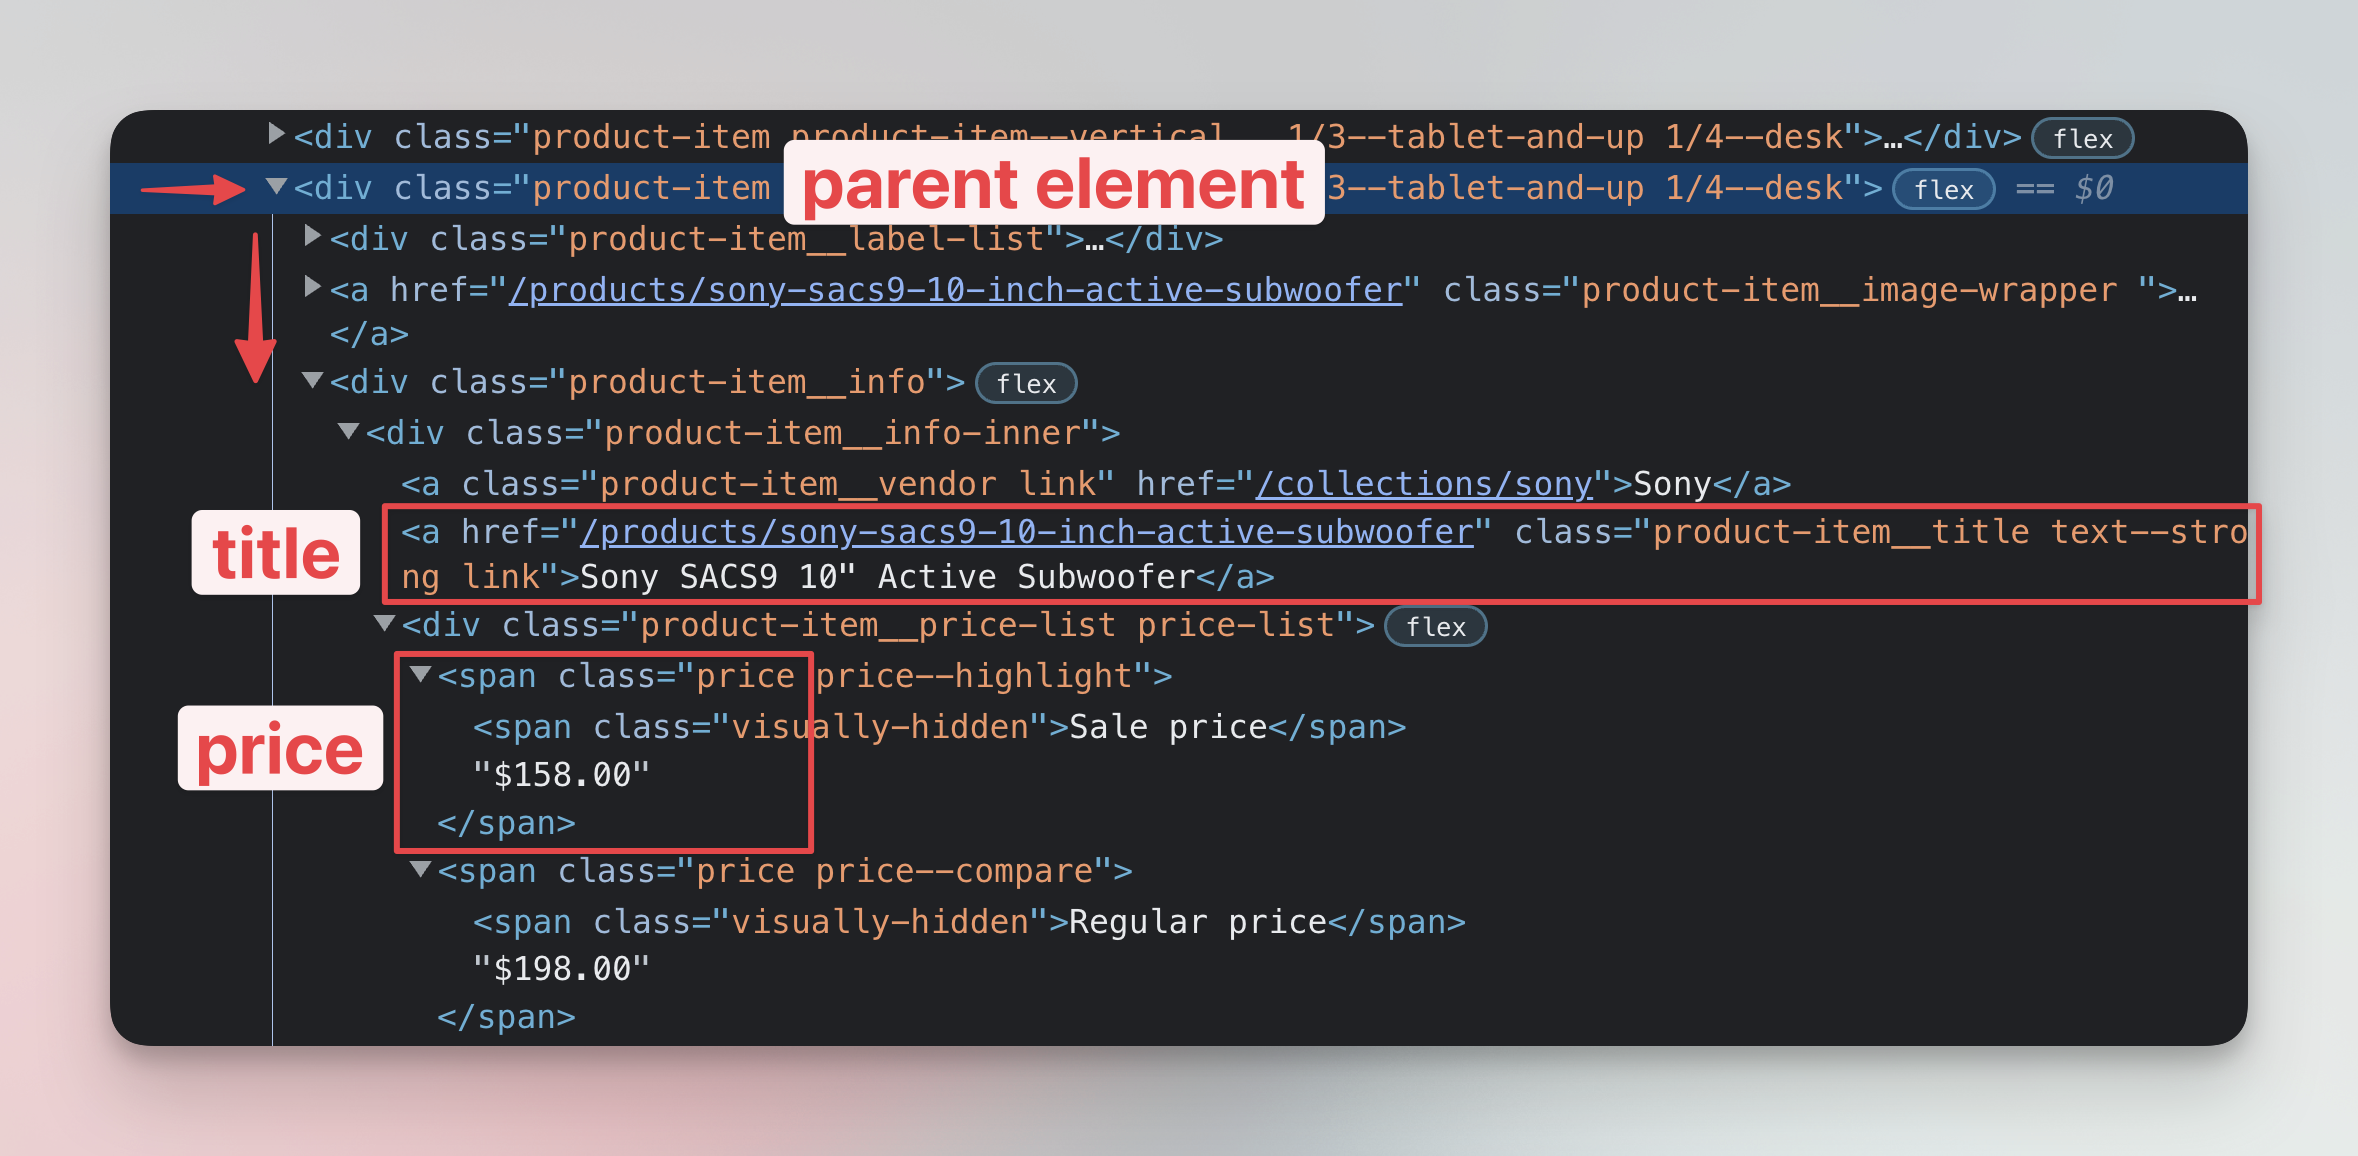 Finding child elements in Elements tab